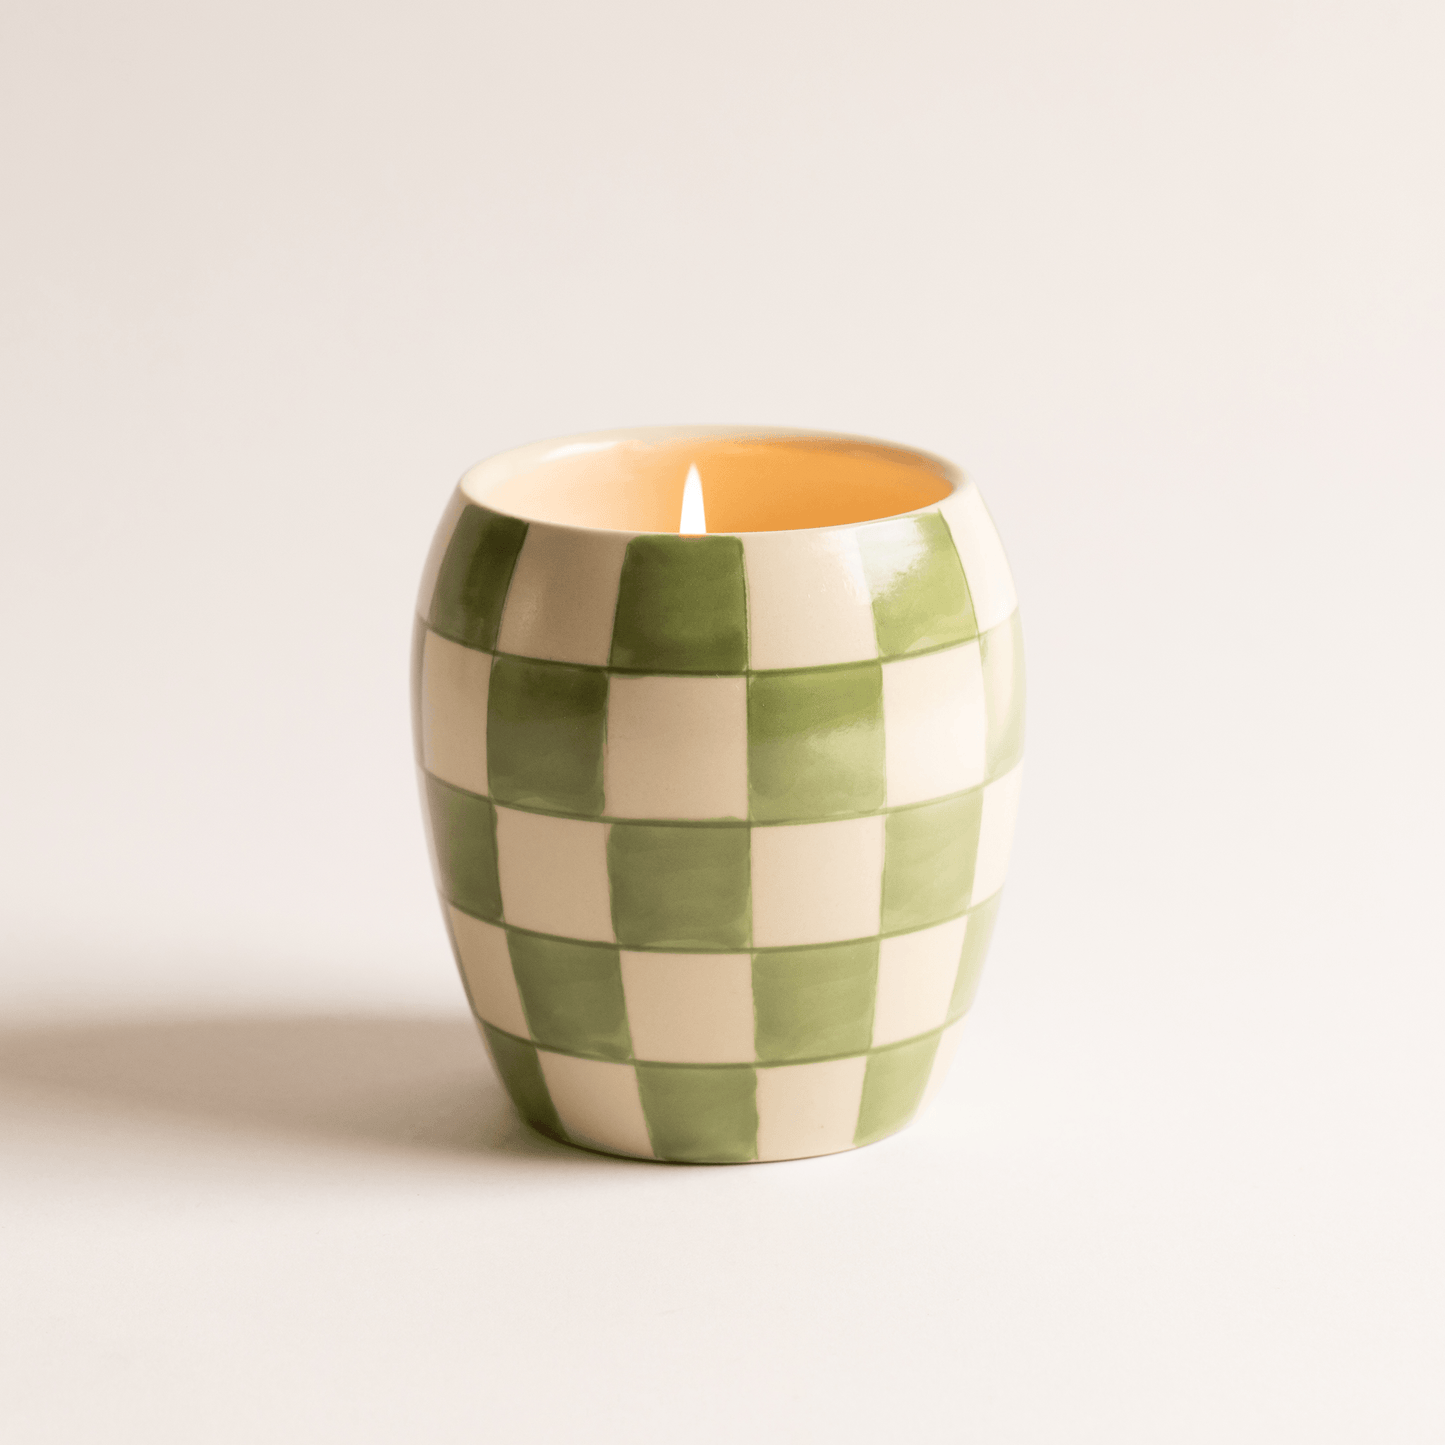 11 oz ceramic vessel with rounded cylindrical shape and a light green/white checker design; one cotton wick